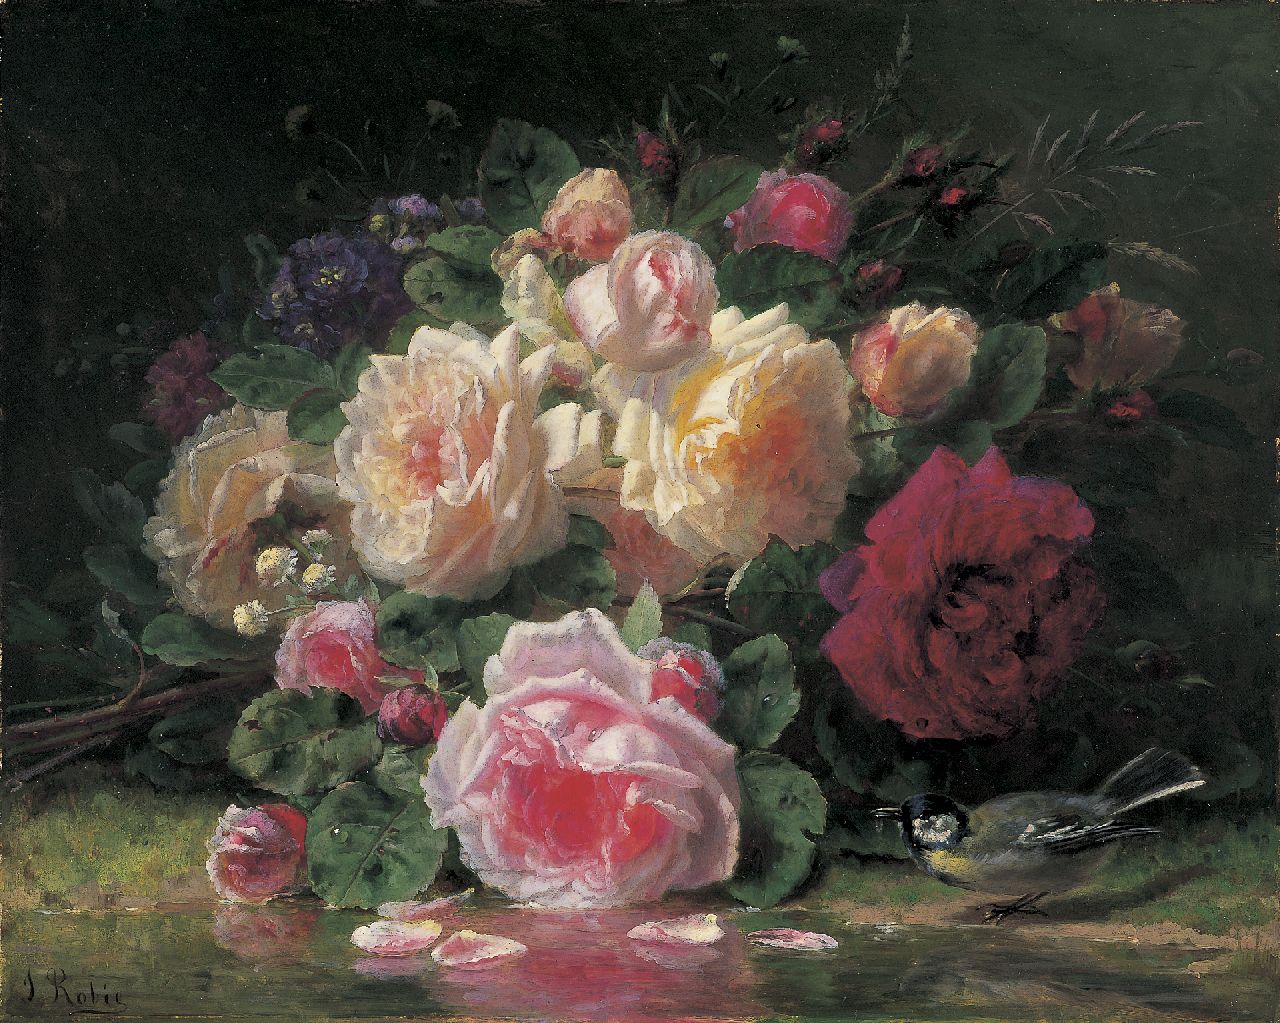 Robie J.B.  | Jean-Baptiste Robie, Roses and a bird by a pond, oil on panel 42.0 x 52.0 cm, signed l.l.